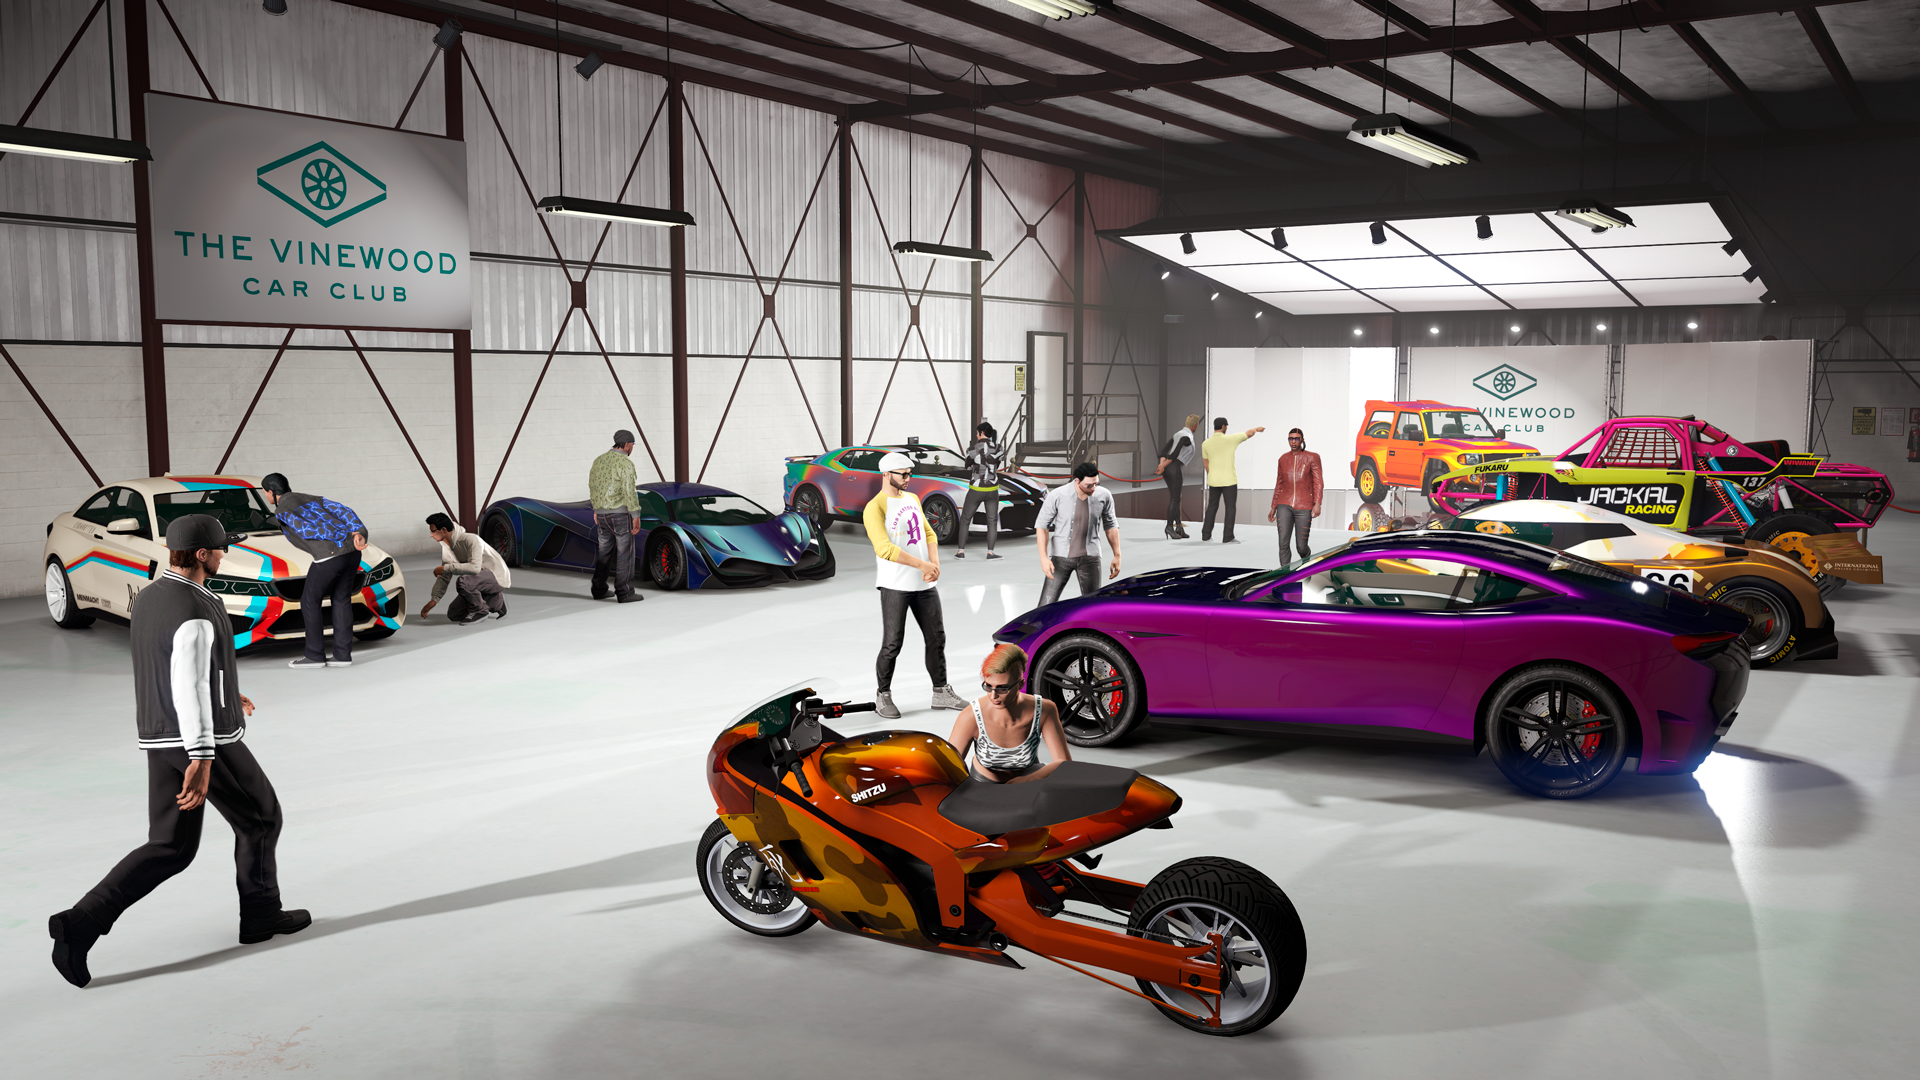 Access a curated stock of distinct vehicles, including a select vehicle to claim free each Event.